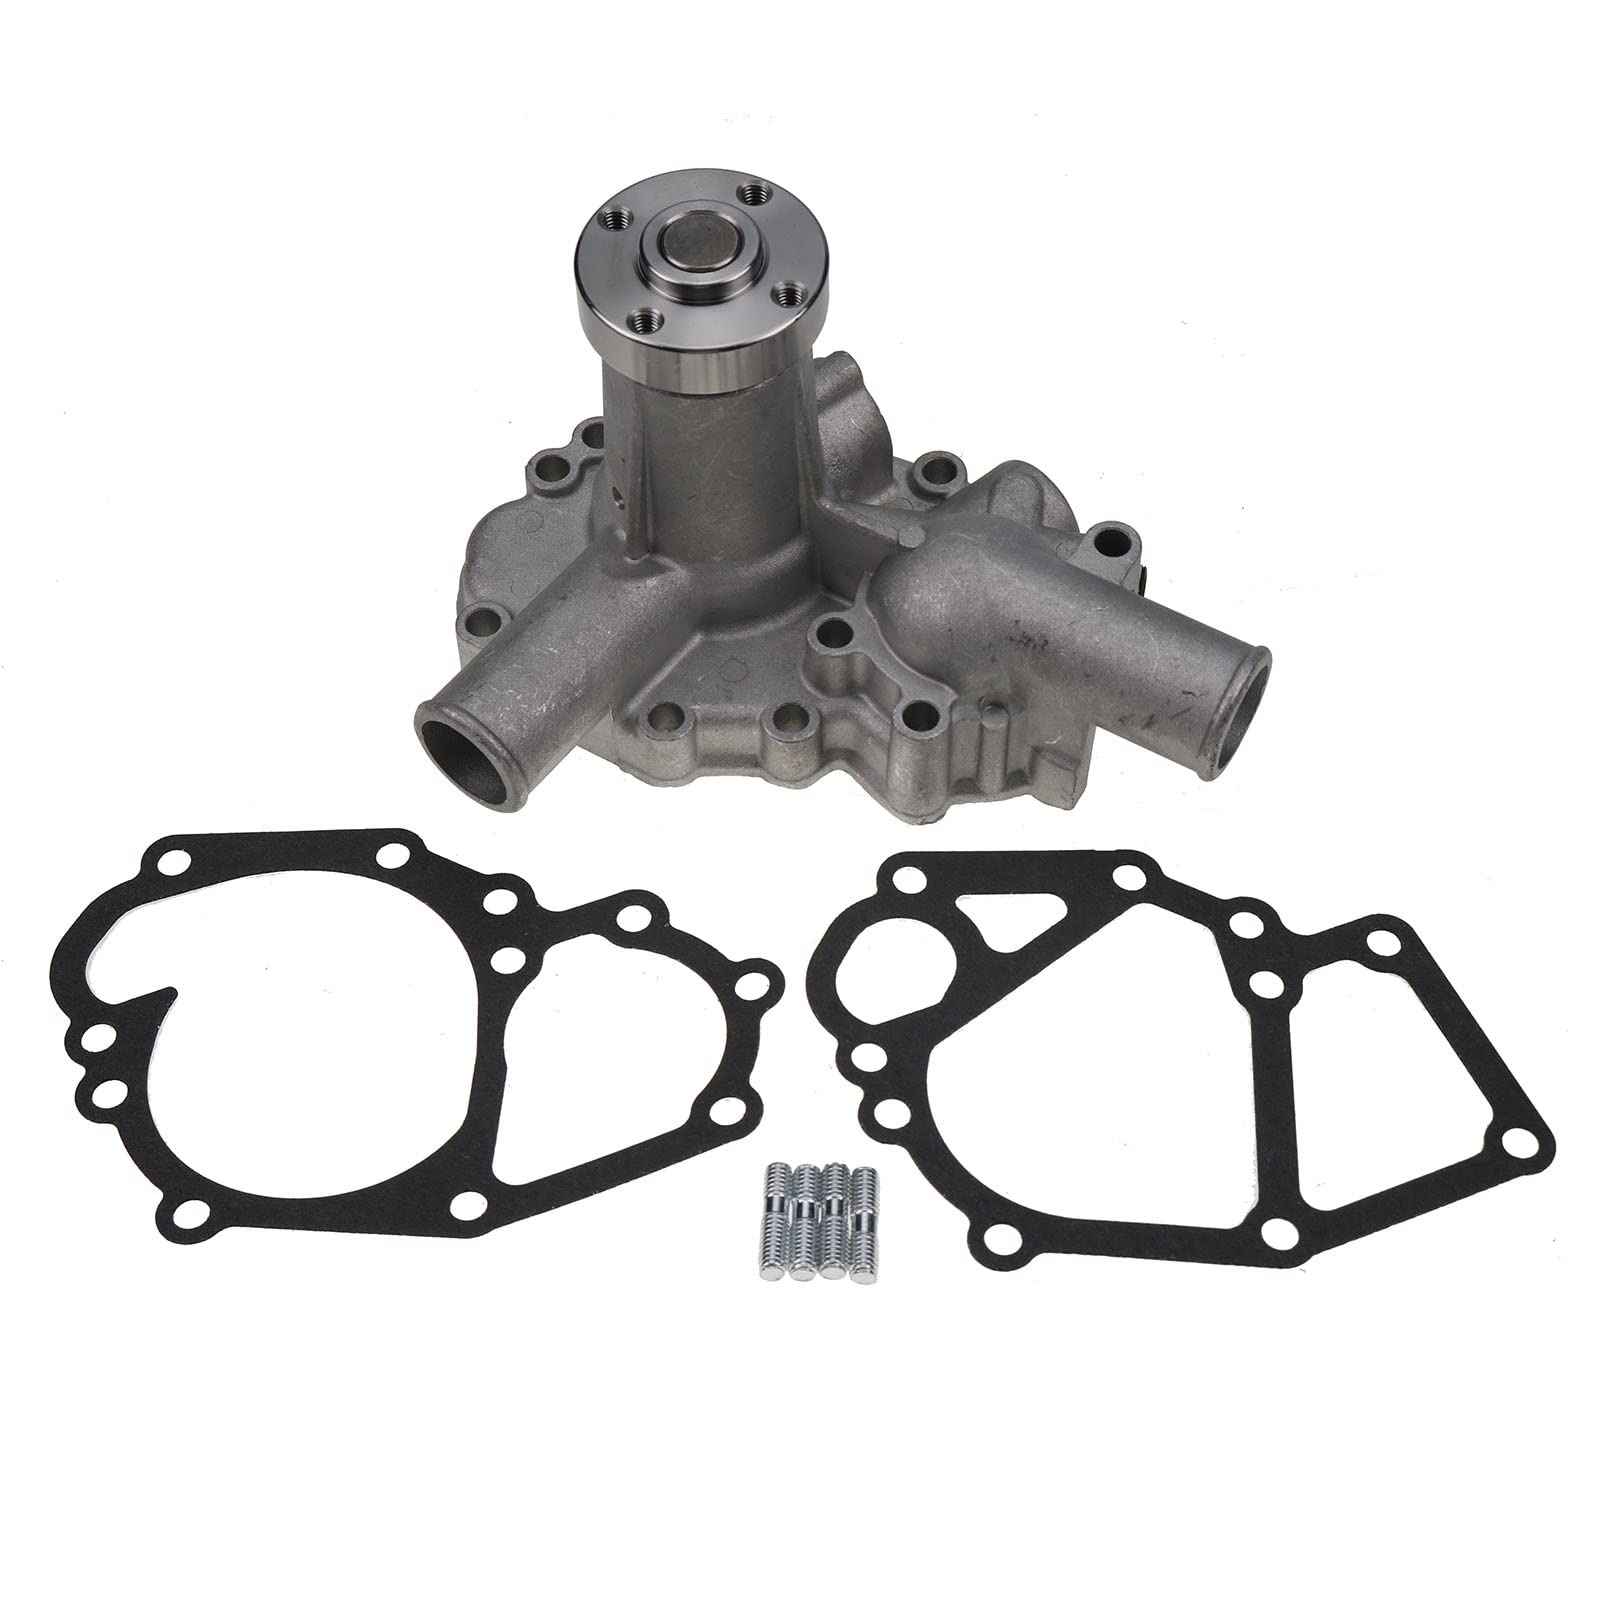 HOLDWELL Water Pump with Gaskets 83989003 SBA145017300 Compatible with Tractors 1120 1310 1215 1210 1220 Skid Steer CL25 S753 S723 SP1500 SP1540 SP1700 SP1740 P15 von Holdwell